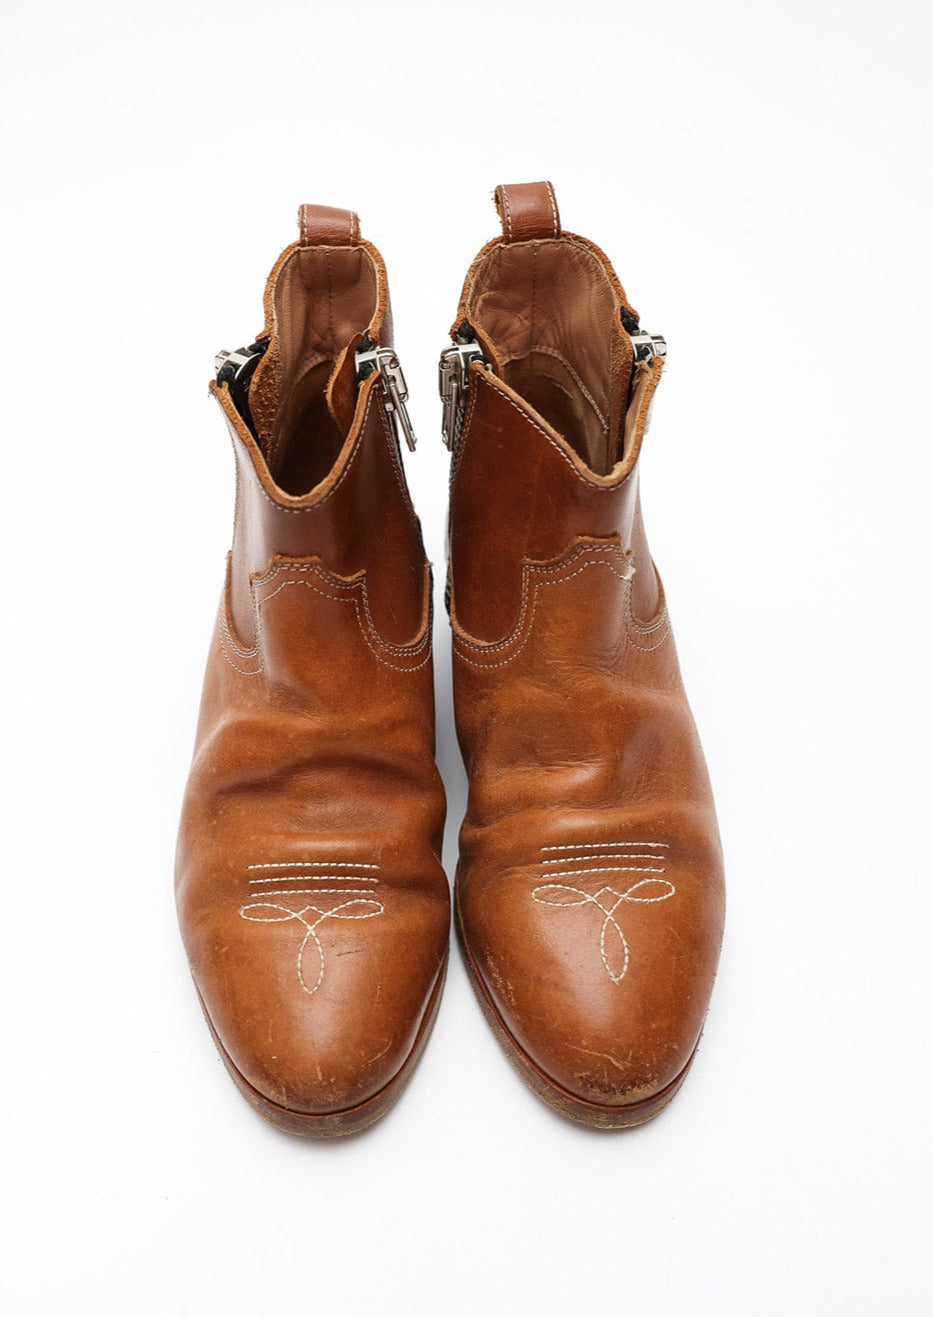 Golden Goose Tan Distressed Ankle Boots